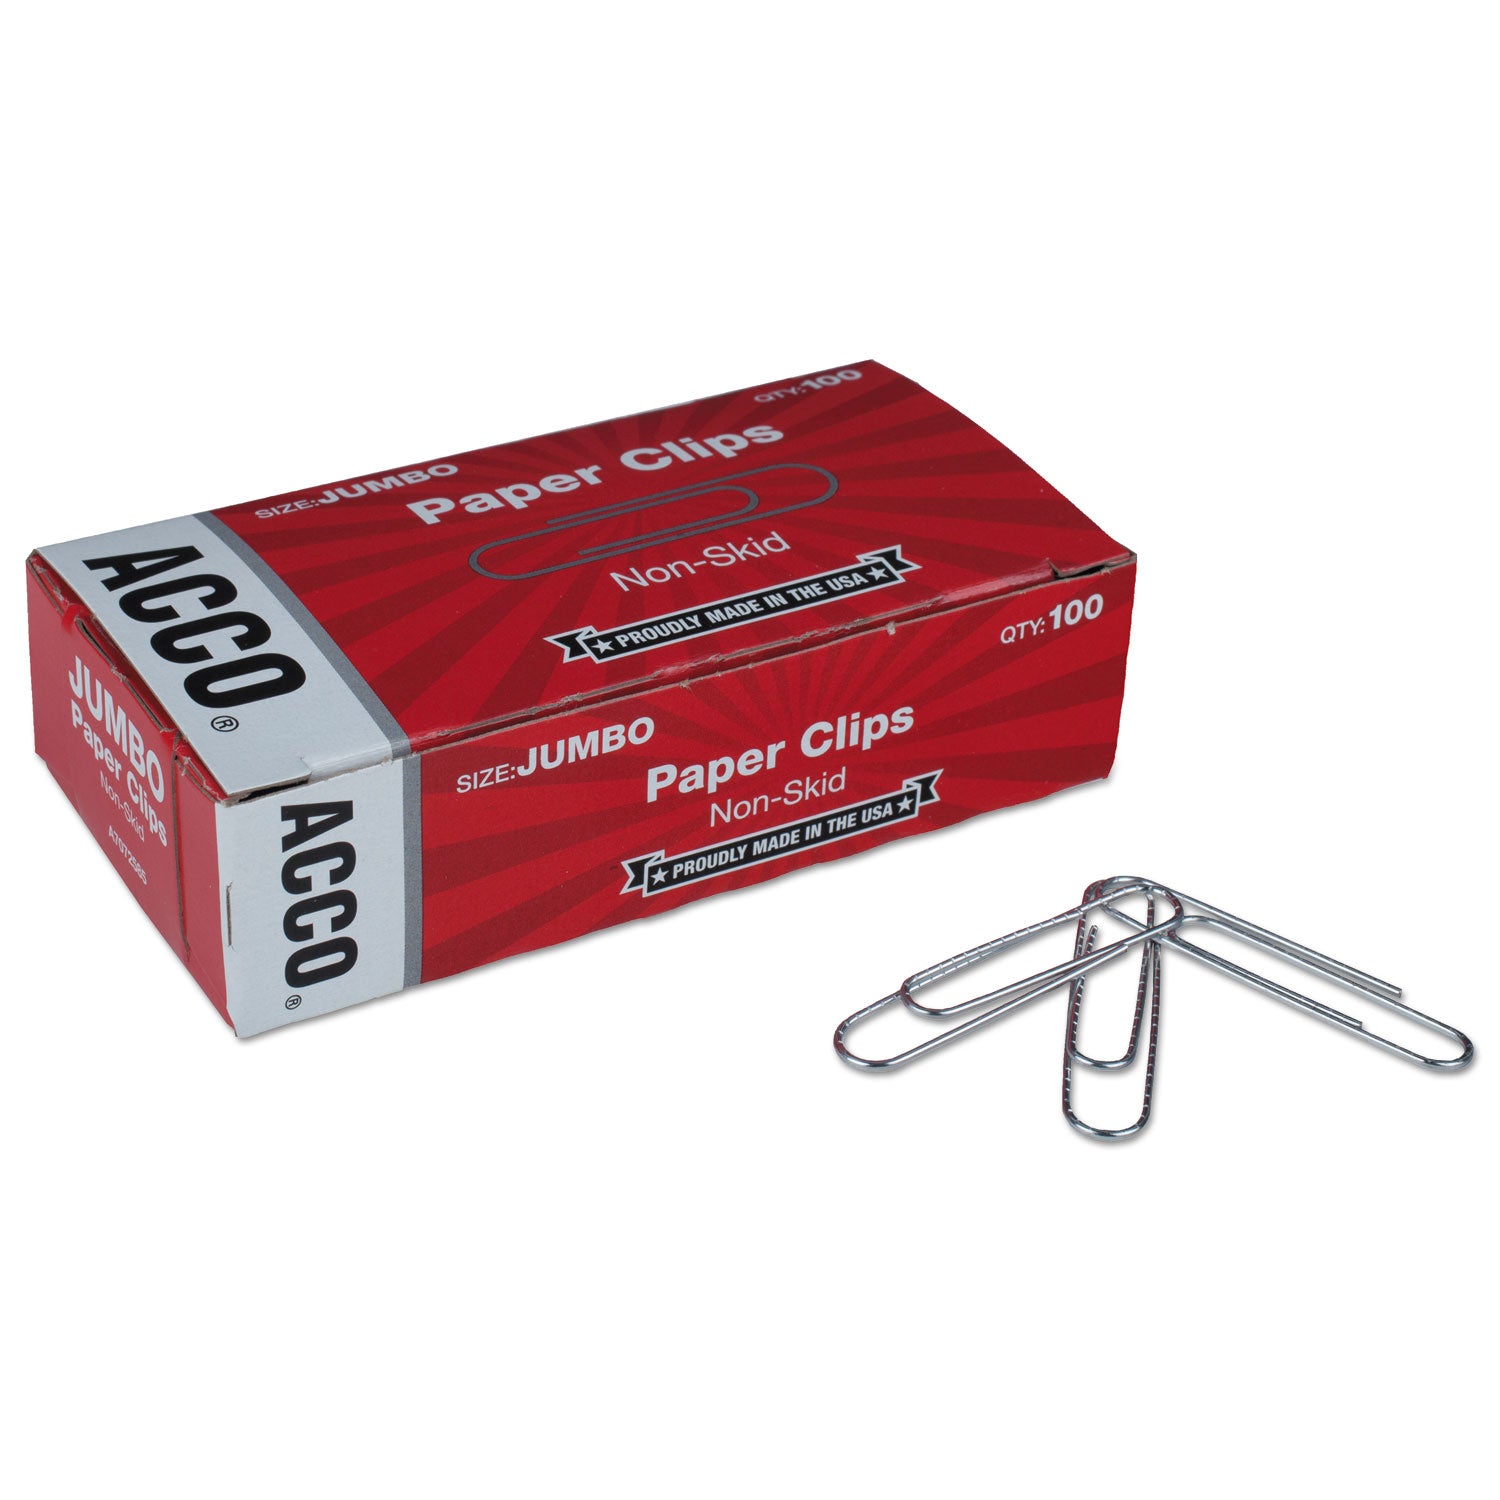 Paper Clips, Jumbo, Nonskid, Silver, 100 Clips/Box, 10 Boxes/Pack - 